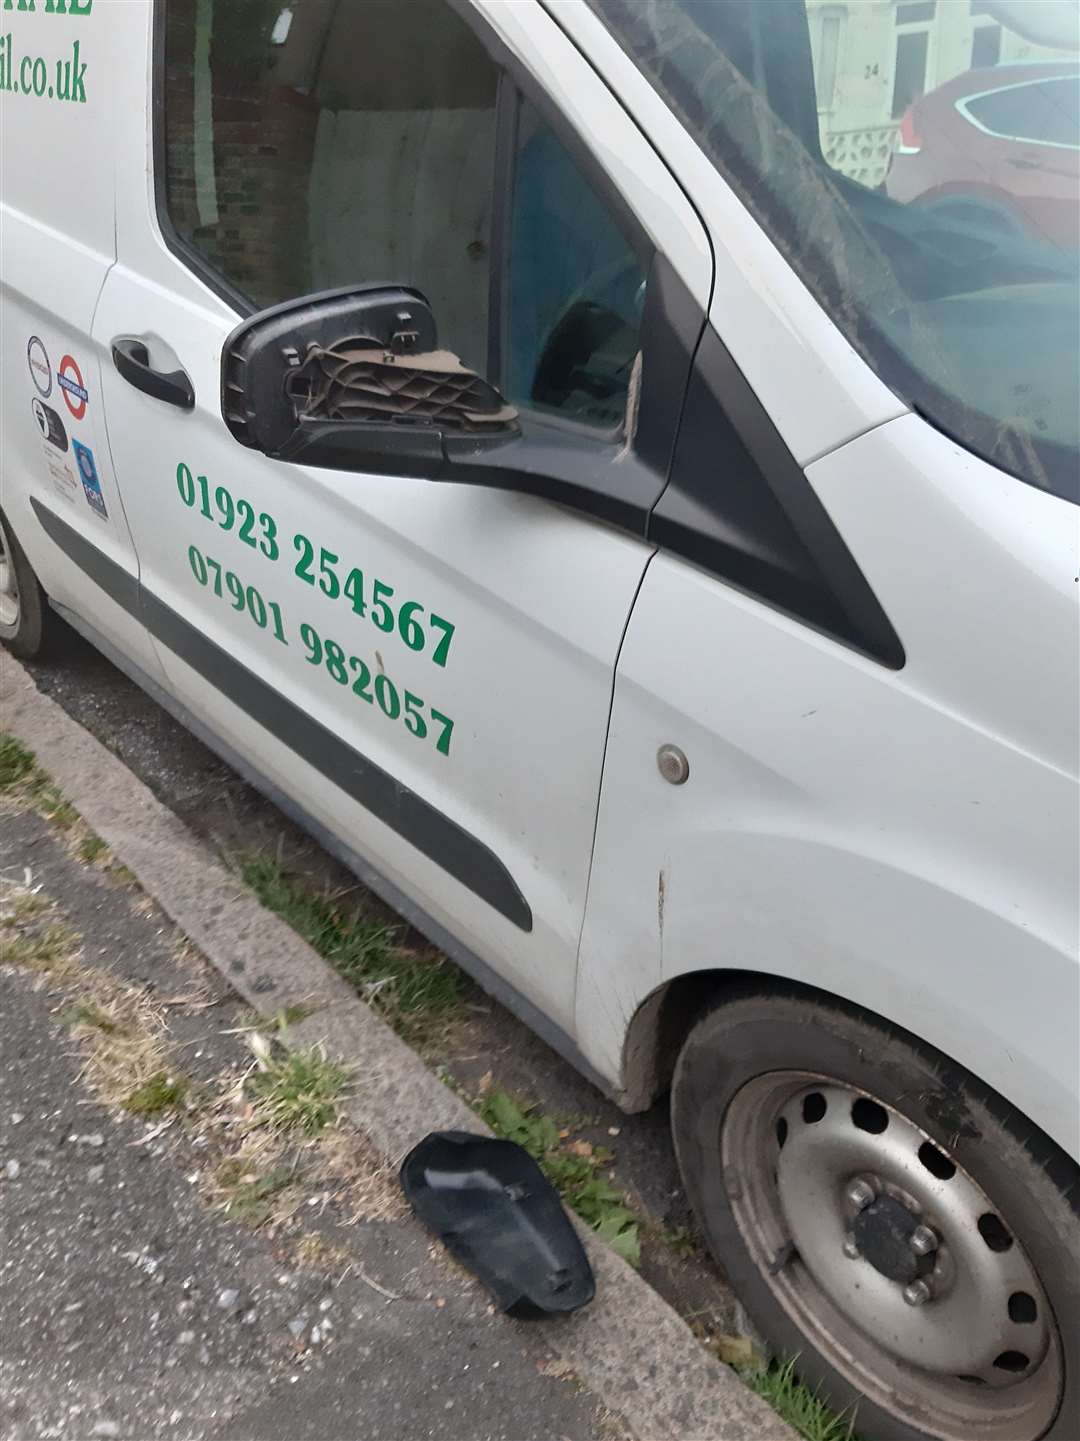 The back cover of this van's mirror is left strewn on the kerb. Picture: Angela Hoskins